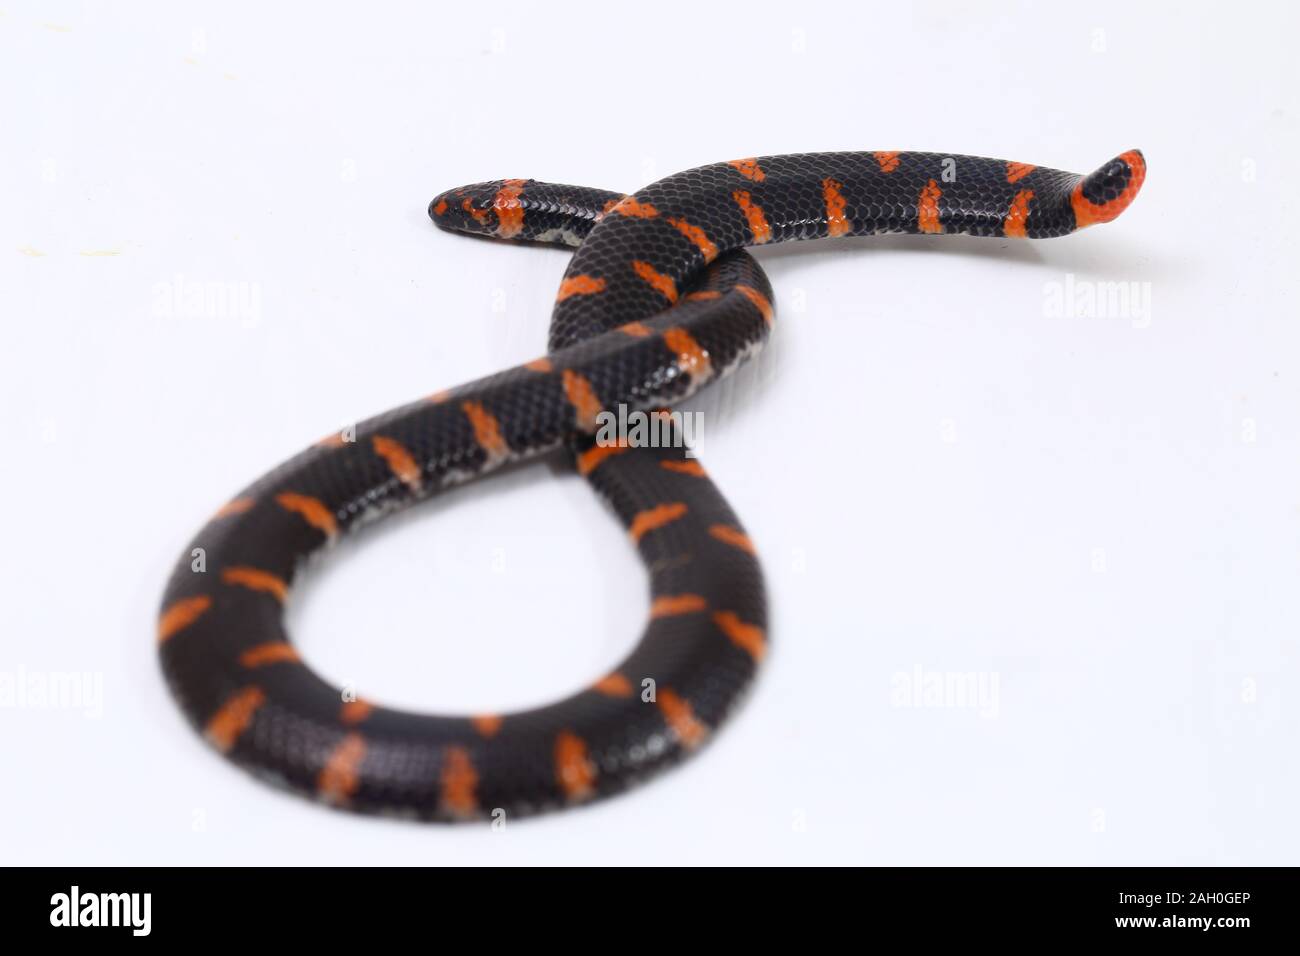 https://c8.alamy.com/comp/2AH0GEP/red-tailed-pipe-snake-scientific-name-cylindrophis-ruffus-isolate-on-white-background-2AH0GEP.jpg